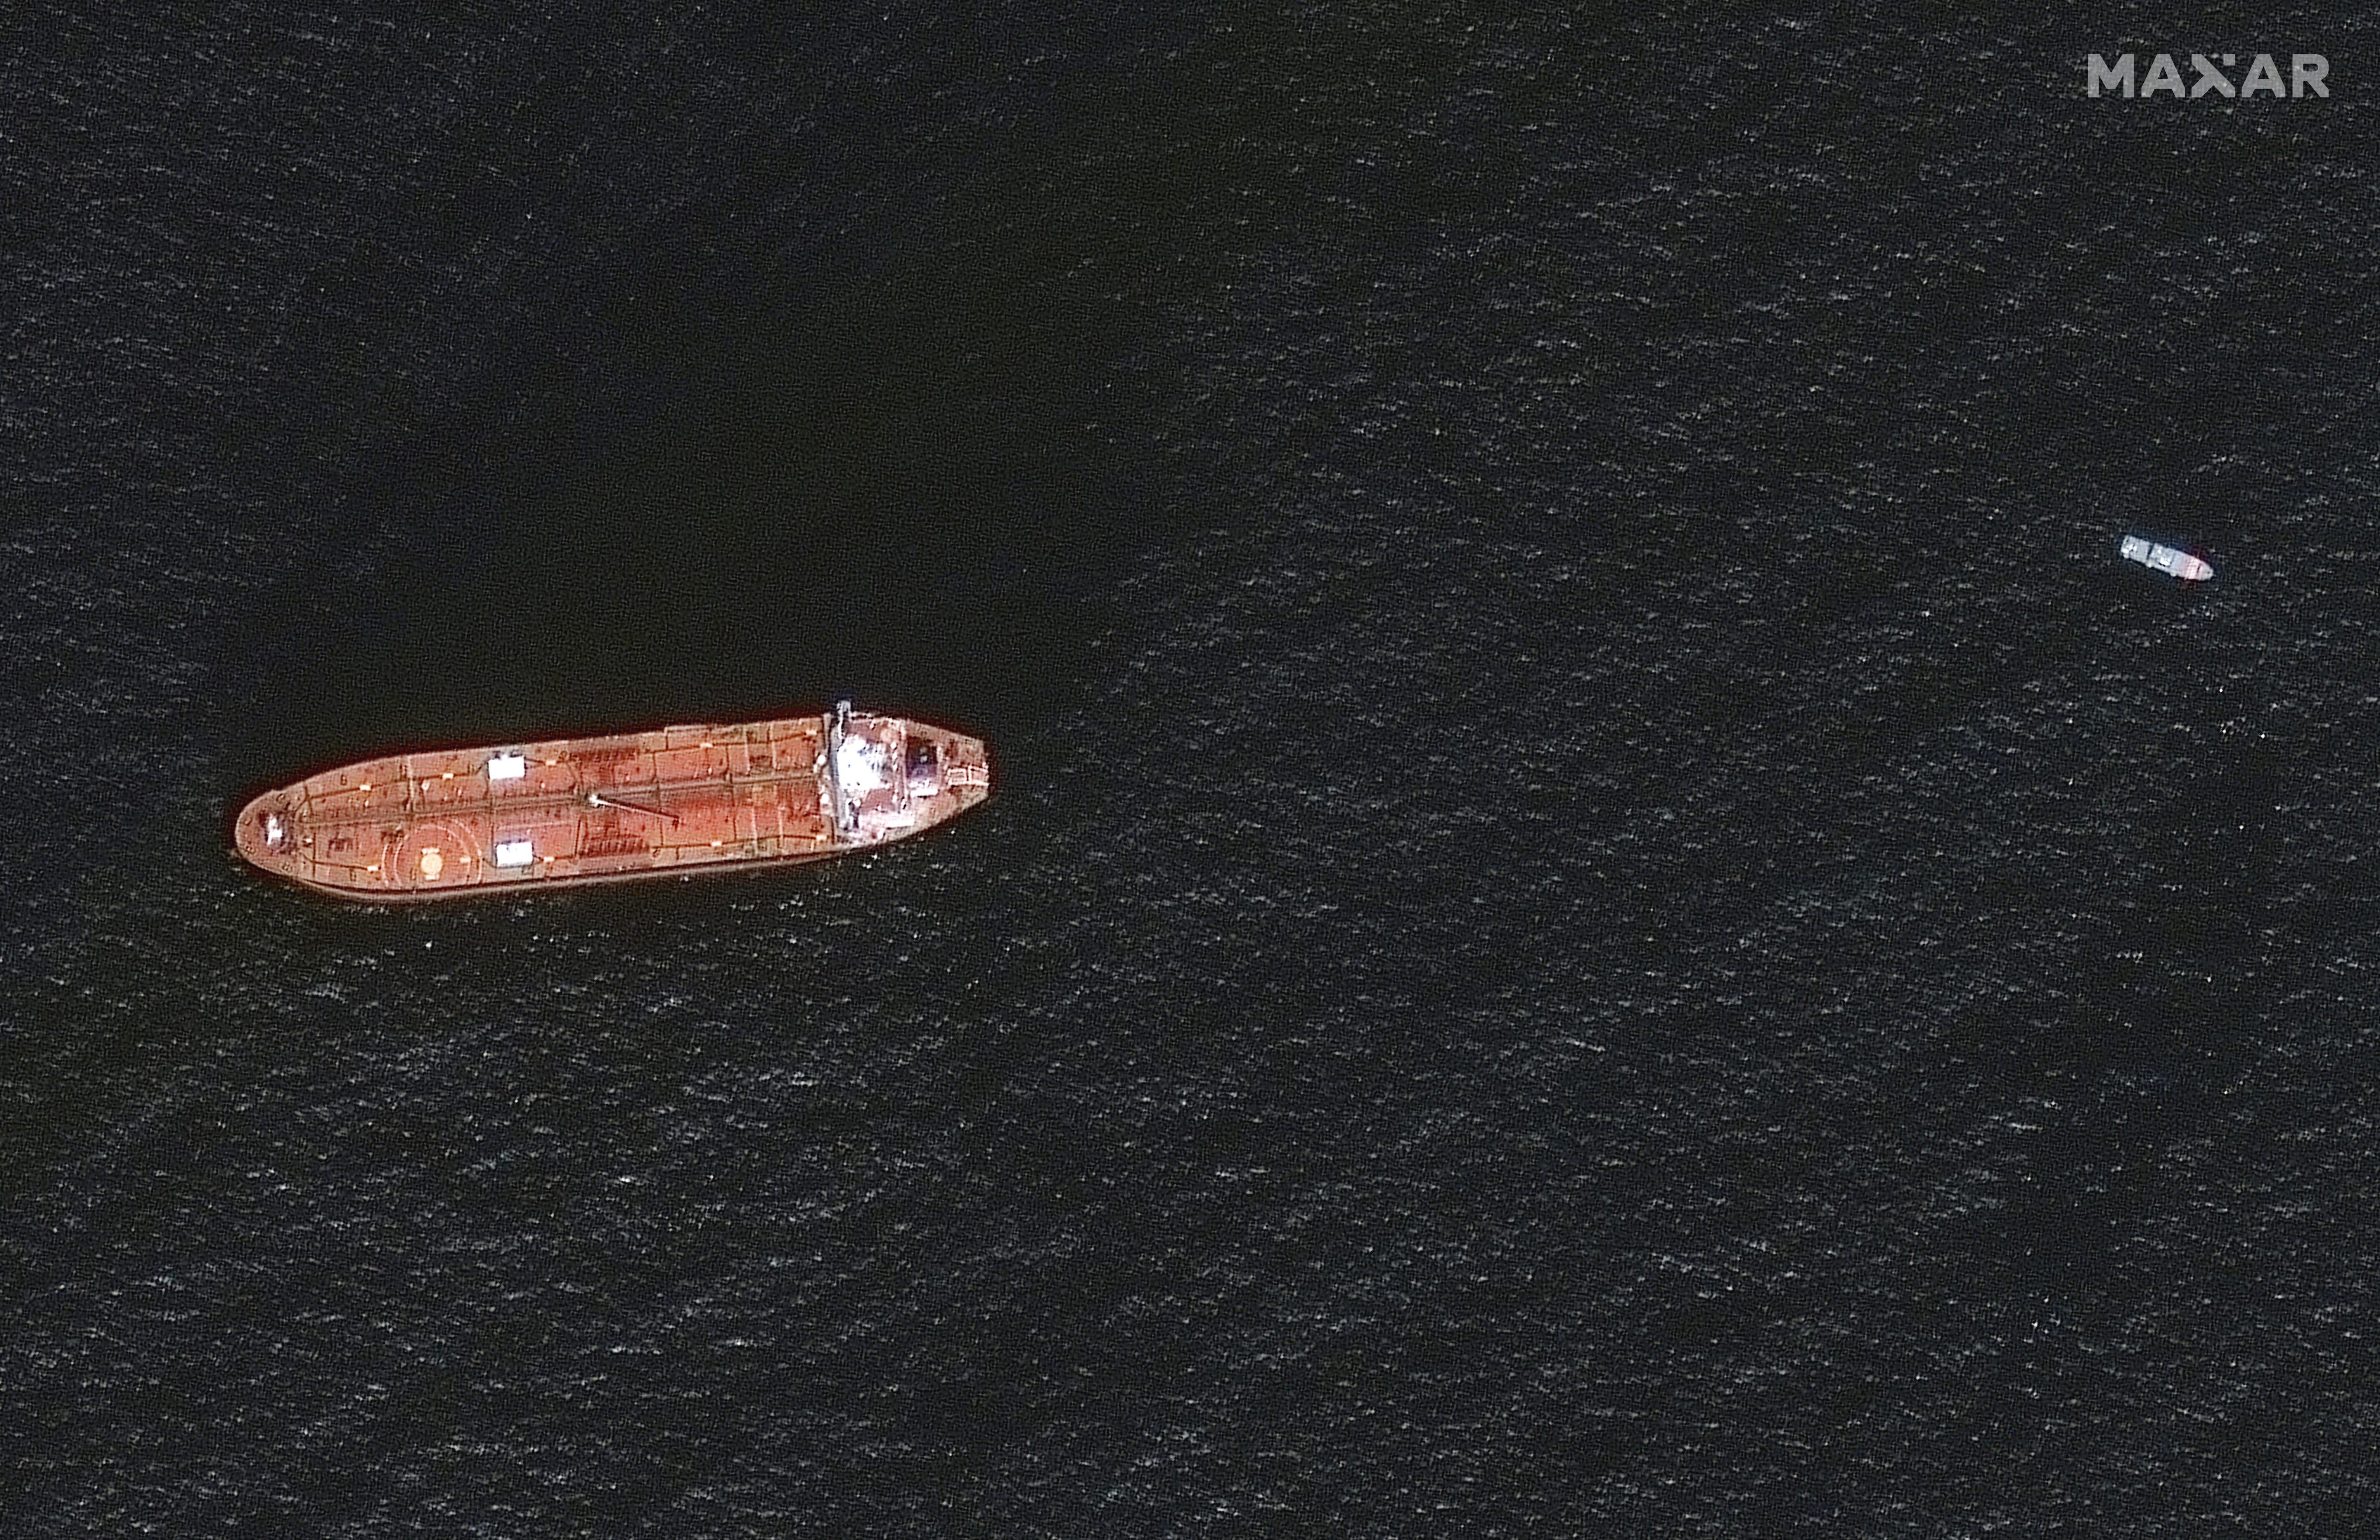 A satellite image shows the damaged Mercer Street Tanker moored off the coast of Fujairah